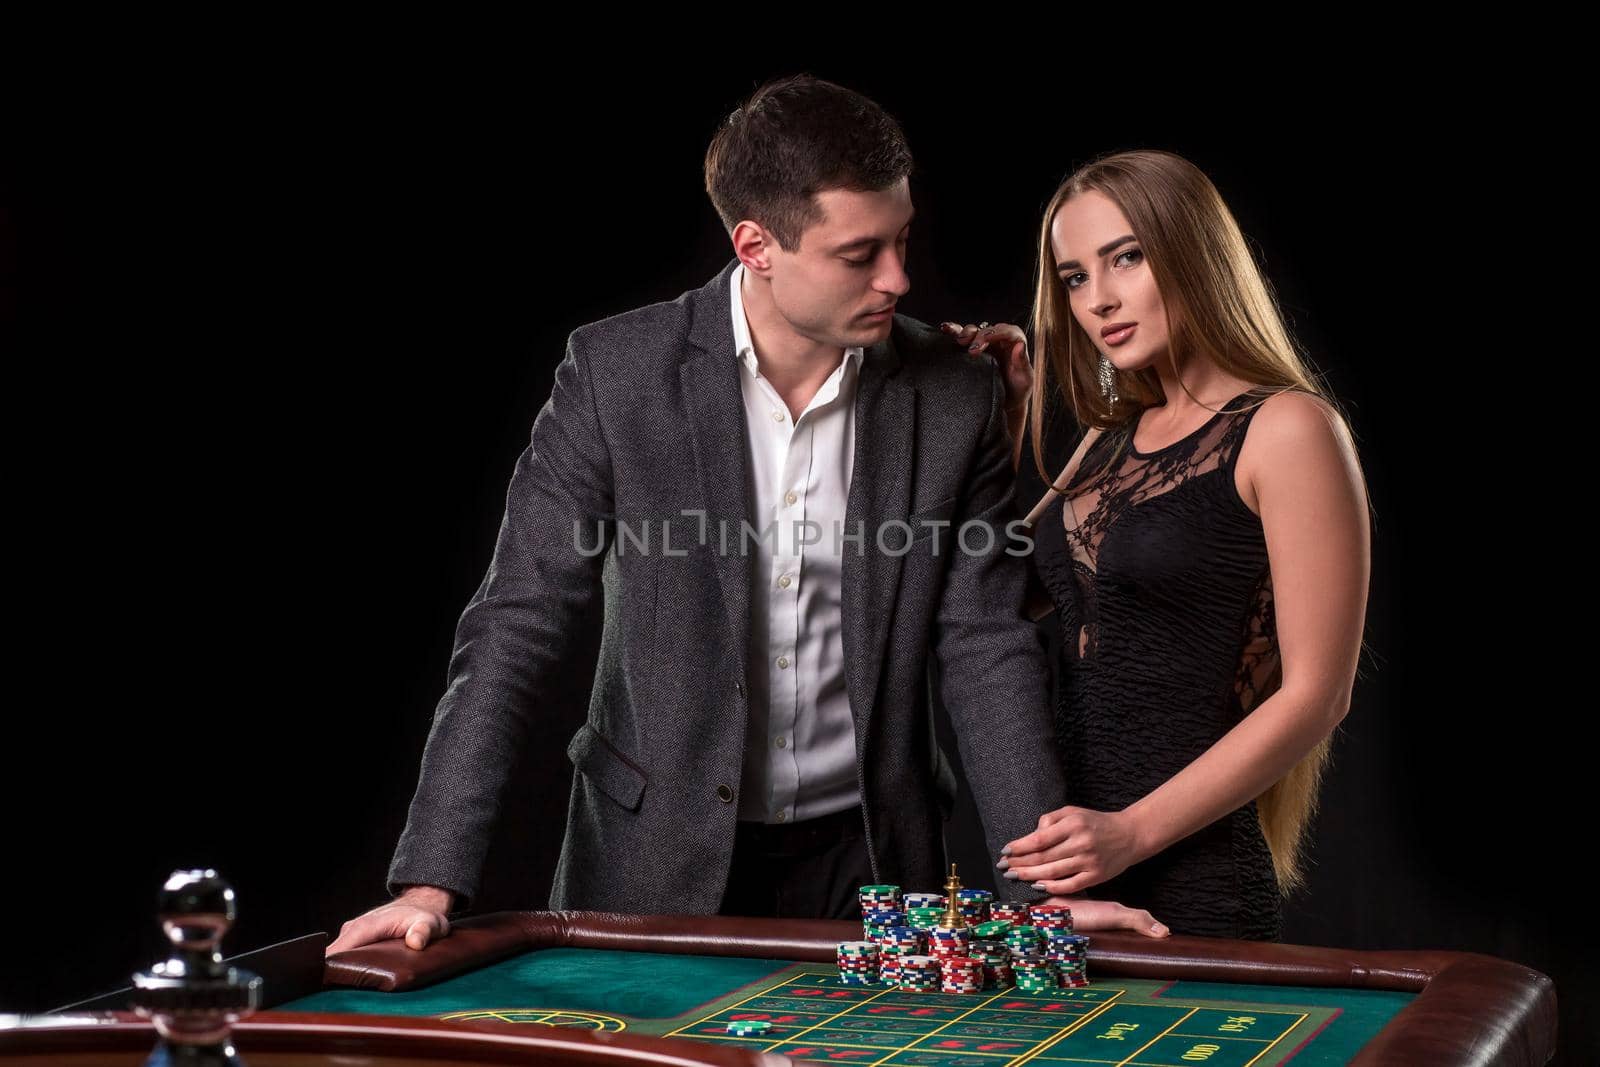 Elegant couple at the casino betting on the roulette, on a black background. A man in a suit with a beautiful young woman in a black dress